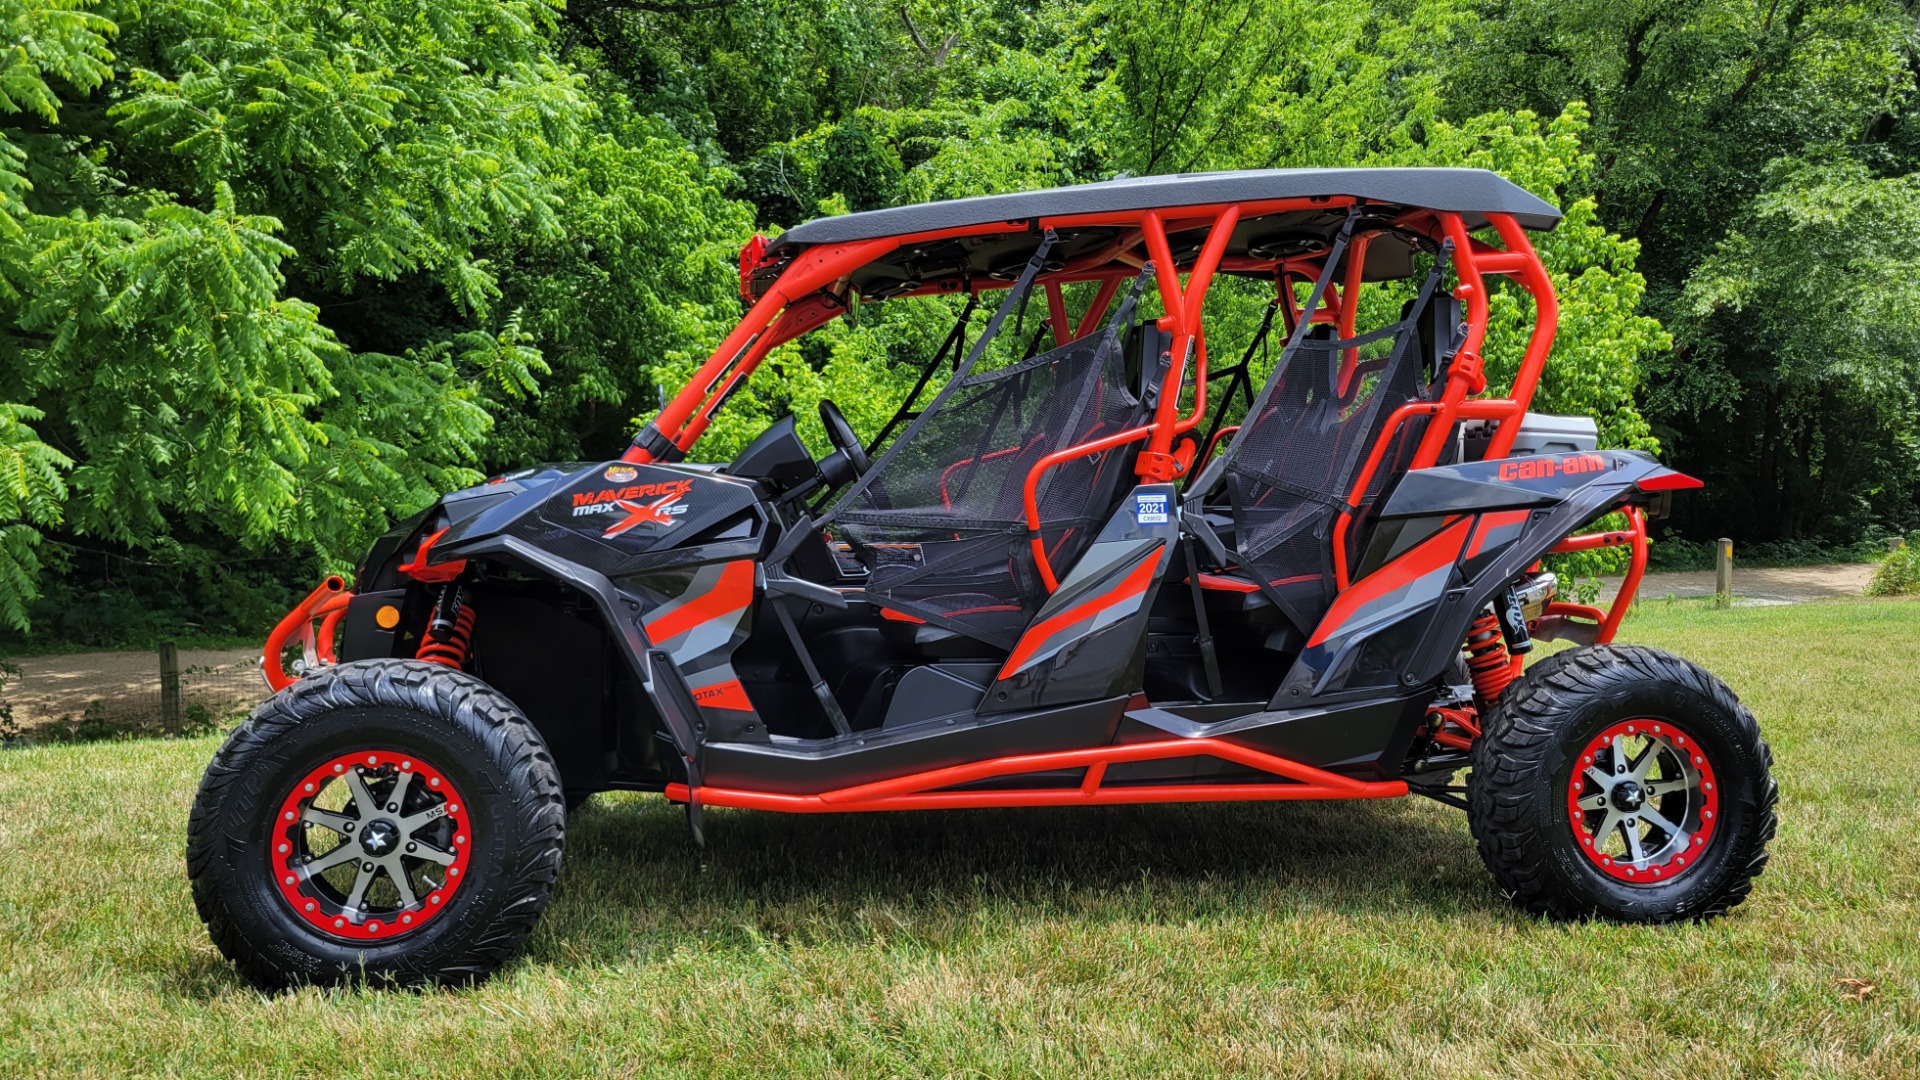 Used 2016 Can-Am MAVERICK MAX X-RS 1000R TURBO / 131HP / 4X4 / 4-SEATER / CUSTOM SOUND SYSTEM for sale $25,995 at Formula Imports in Charlotte NC 28227 2